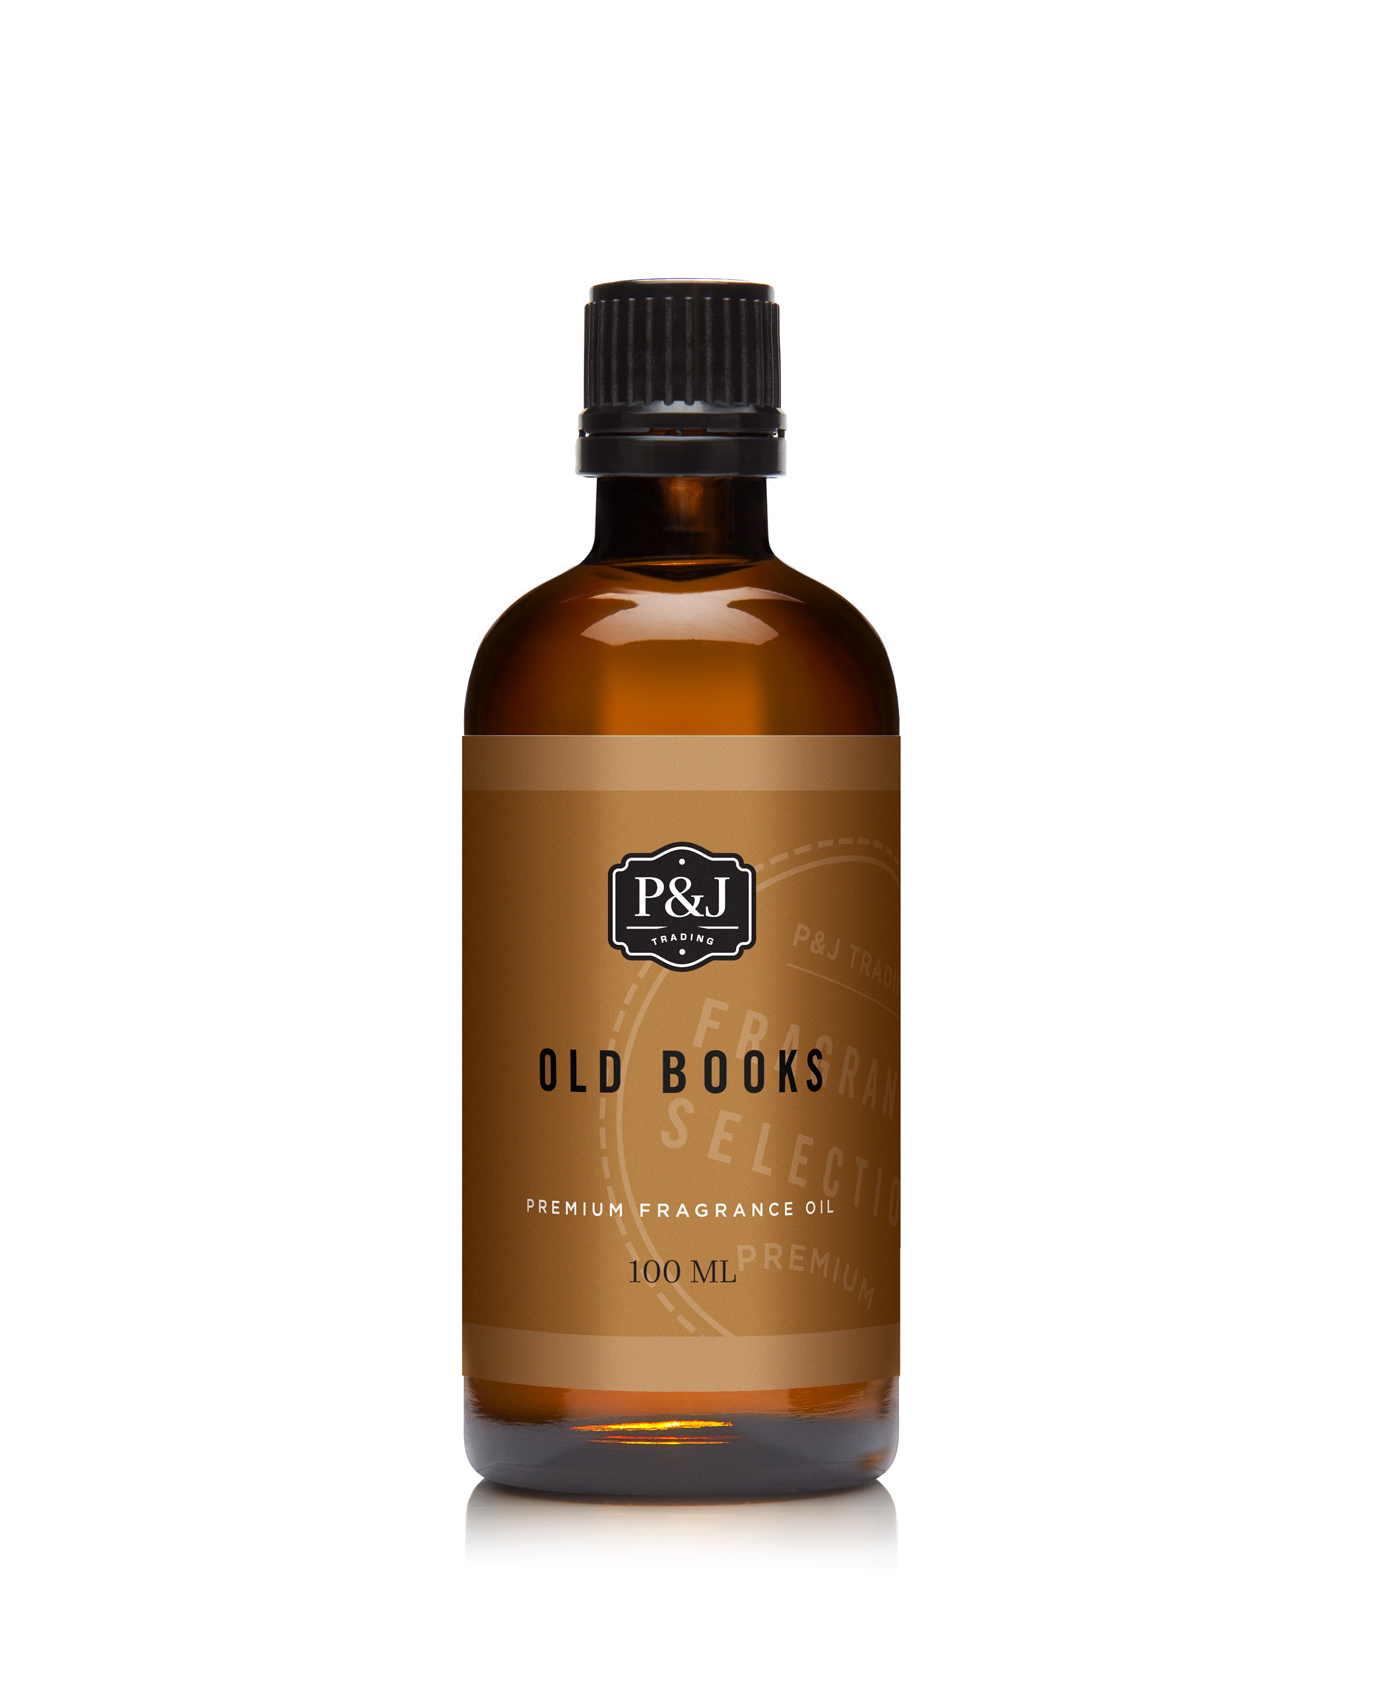 P&j Trading Fragrance Oil | Redwood Forest 100ml - Scented Oil for Soap Making, Diffusers, Candle Making, Lotions, Haircare, Slime, and Home